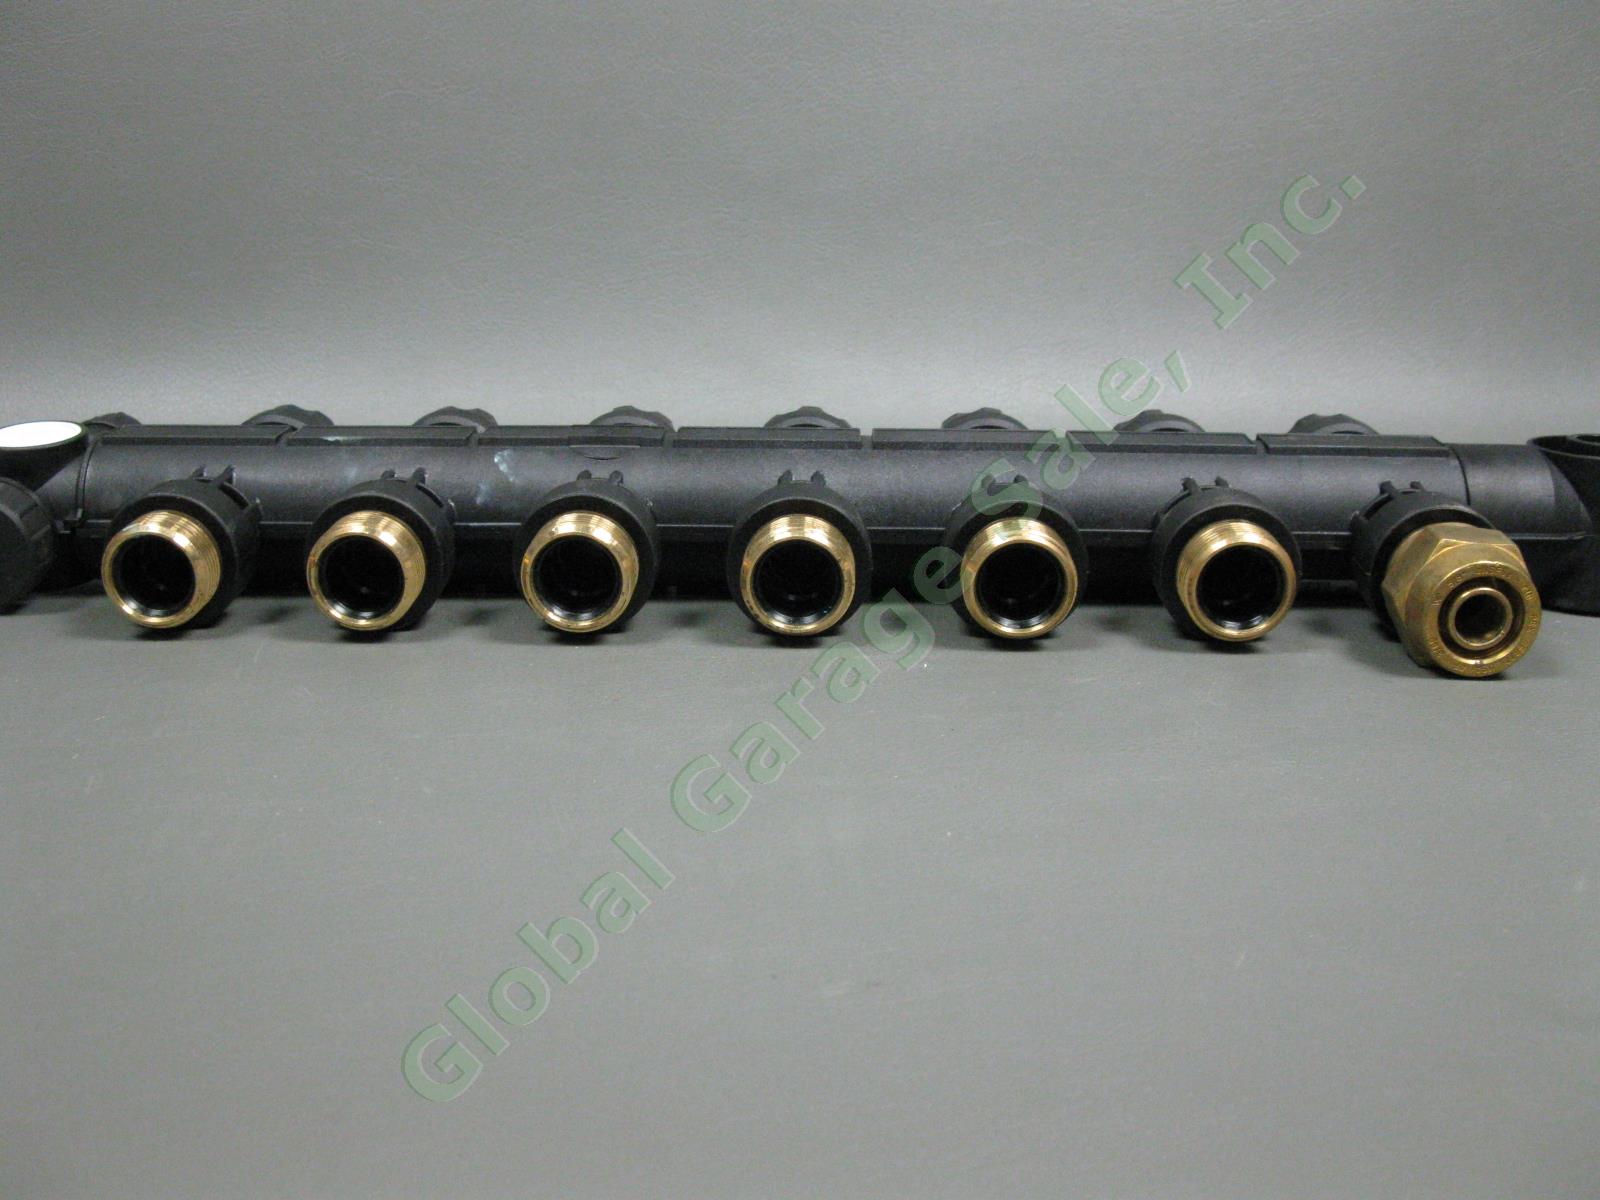 NEW Uponor A2670701 EP Radiant Heating Manifold Assembly Single Row 7-Loop NR! 4